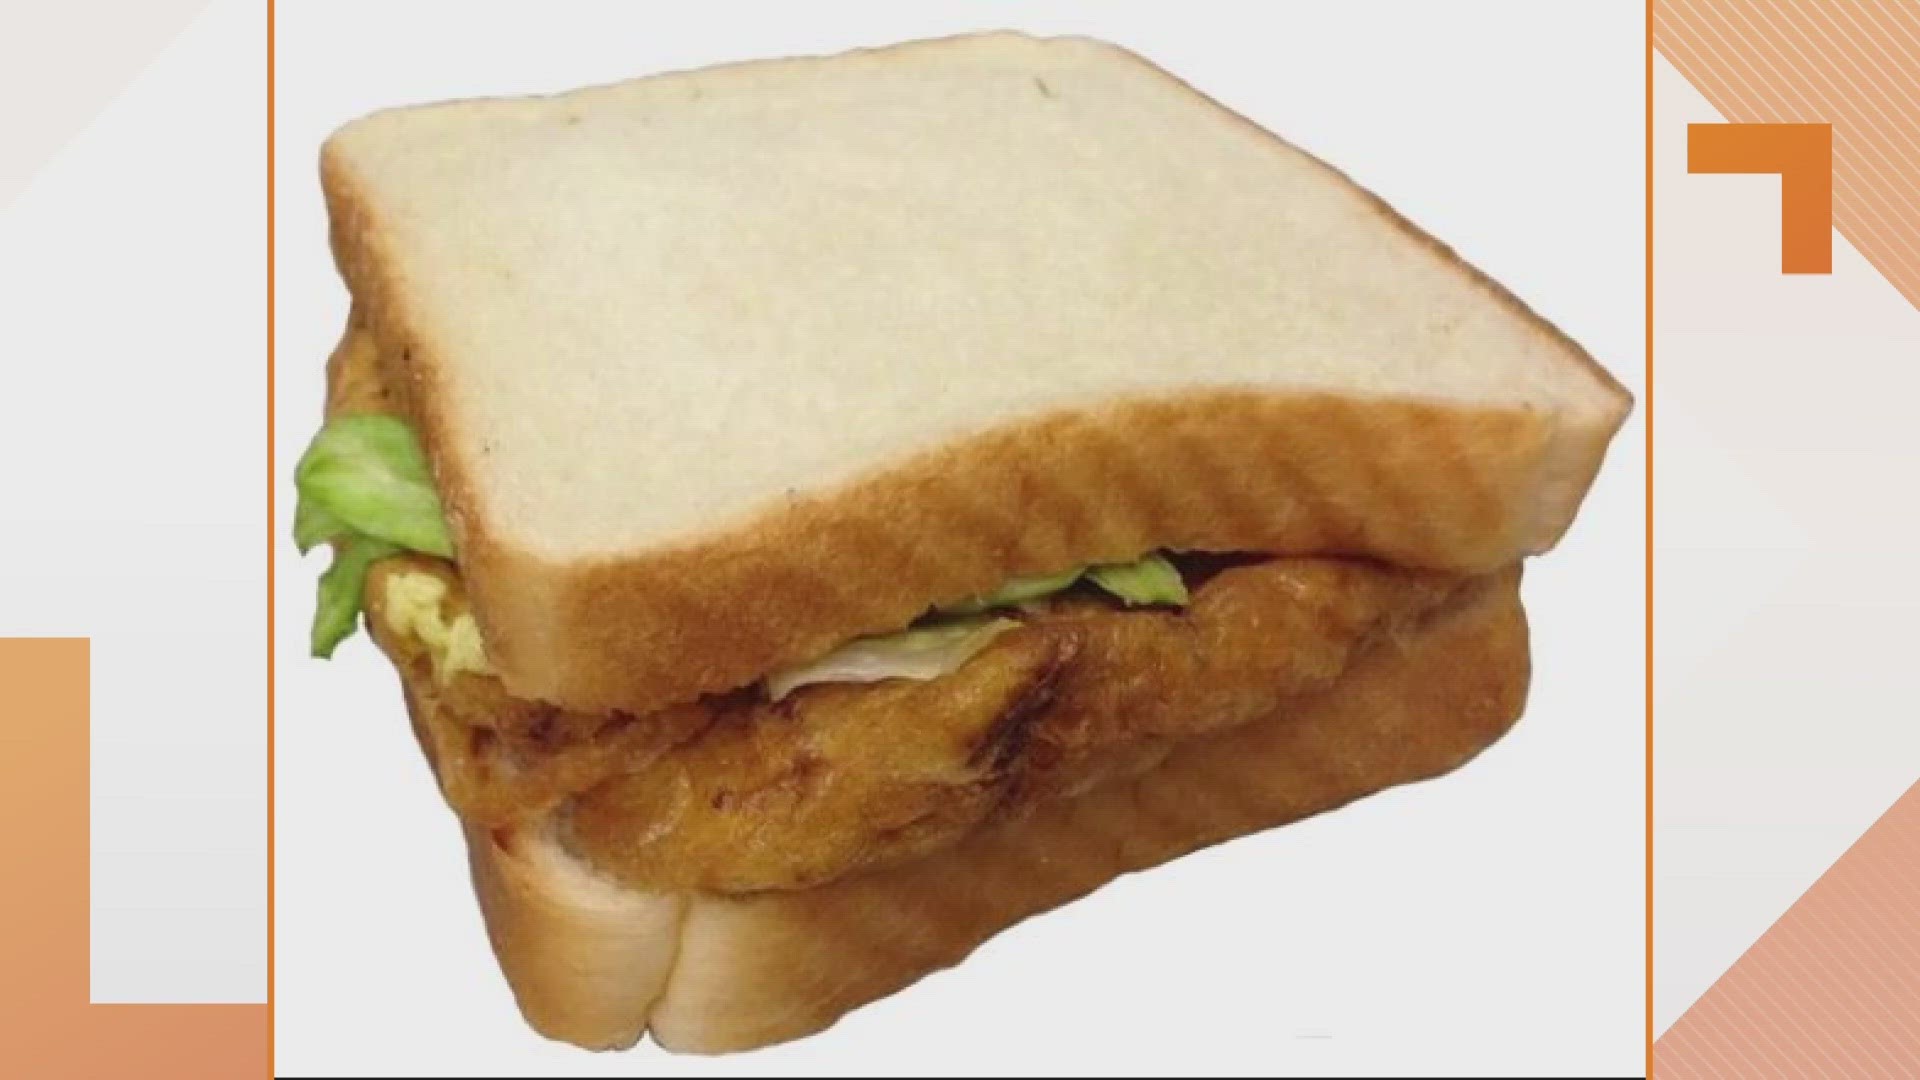 Missouri's immigrants created the St. Paul sandwich in the early 1940s. Legend says it was invented by Steven Yuen at Park Chop Suey in Lafayette Square.